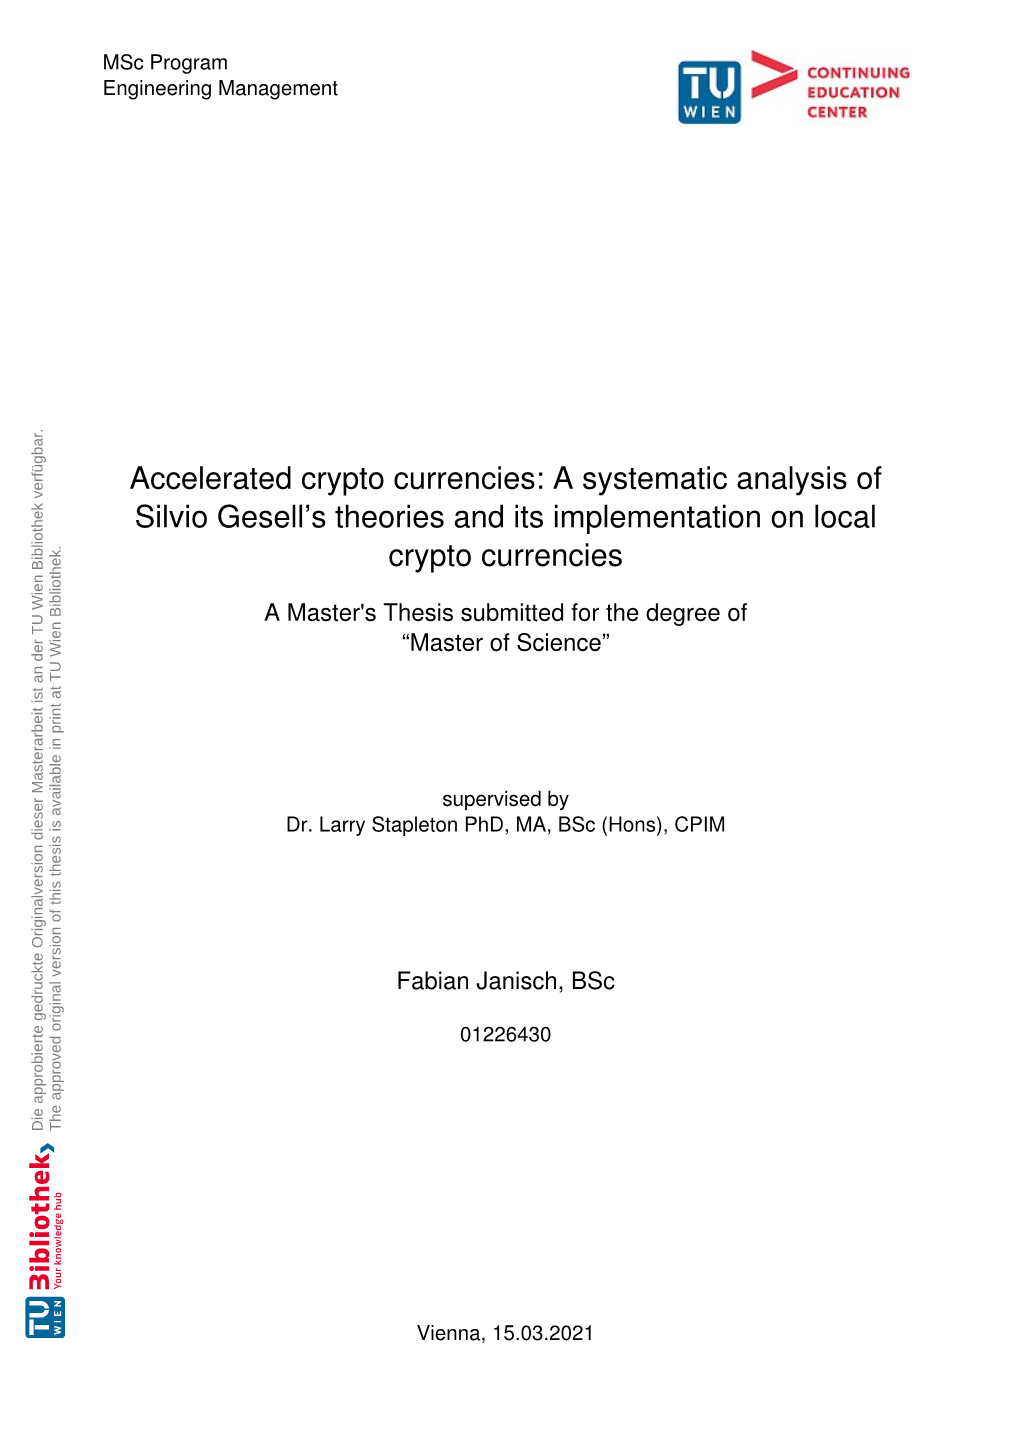 Accelerated Crypto Currencies: a Systematic Analysis of Silvio Gesell’S Theories and Its Implementation on Local Crypto Currencies